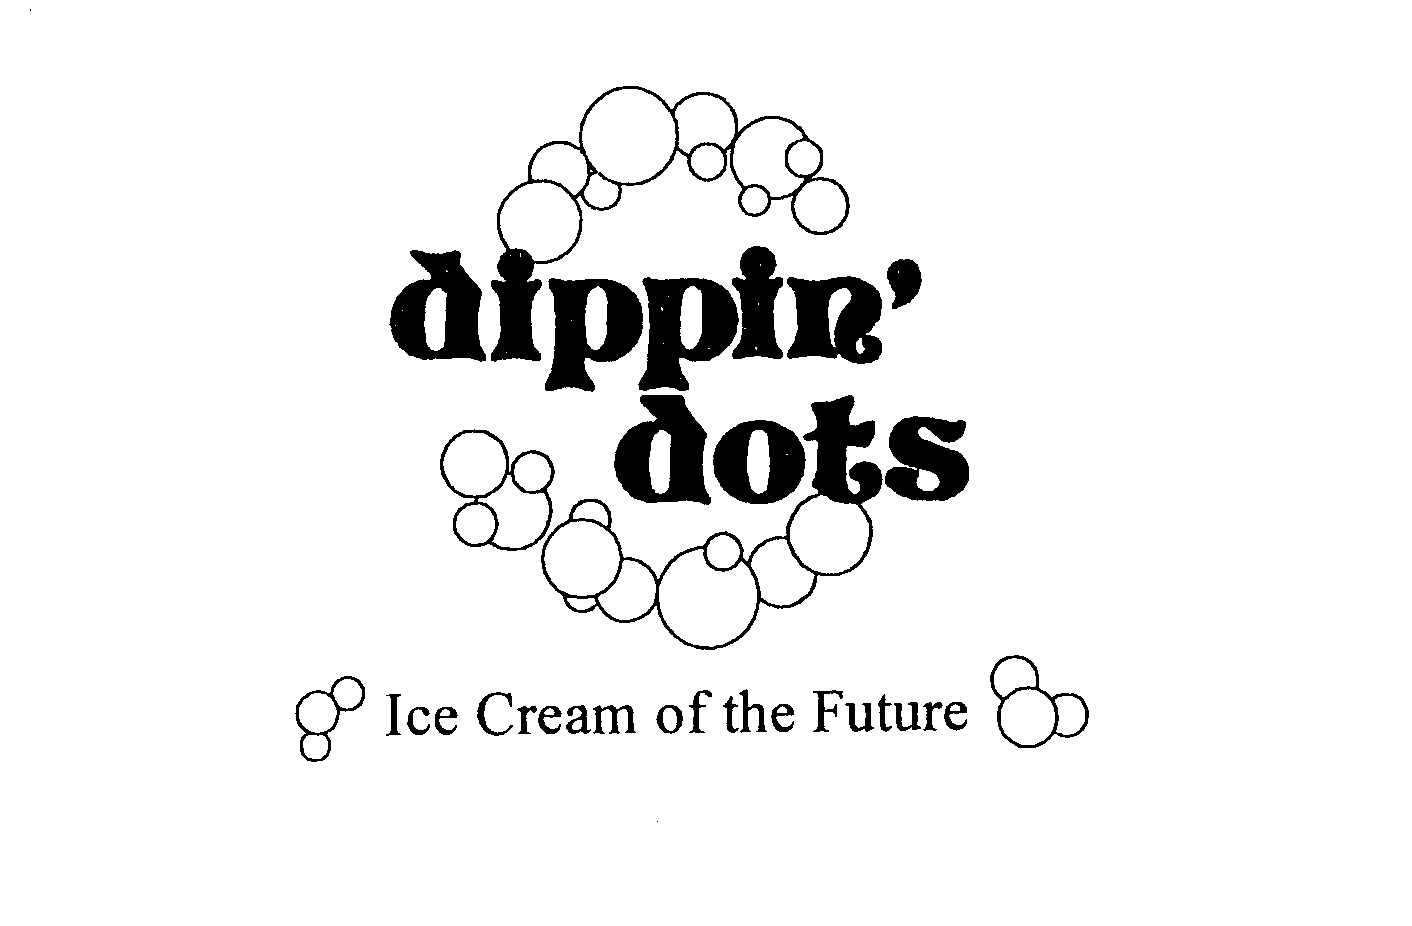 DIPPIN' DOTS ICE CREAM OF THE FUTURE